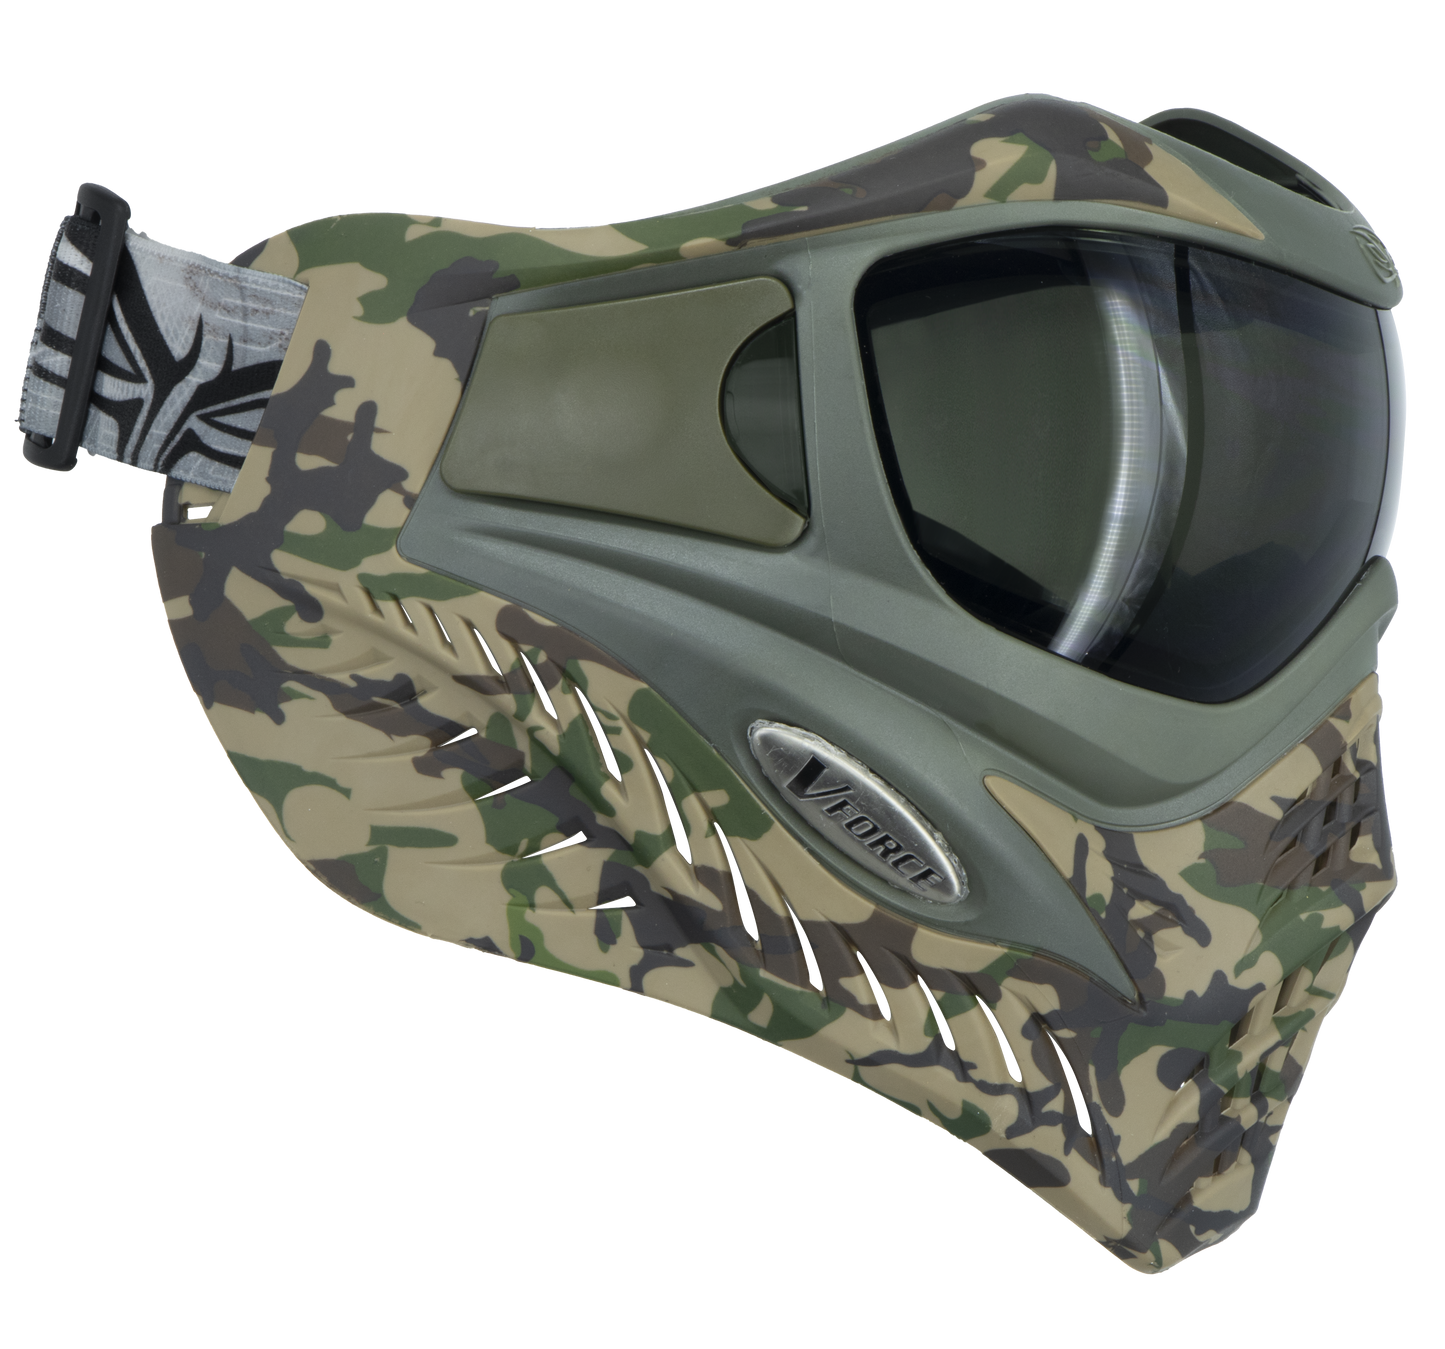 V-Force Grill SE Paintball Mask Goggle - Woodlands Camo w/ Smoke & Clear Lens